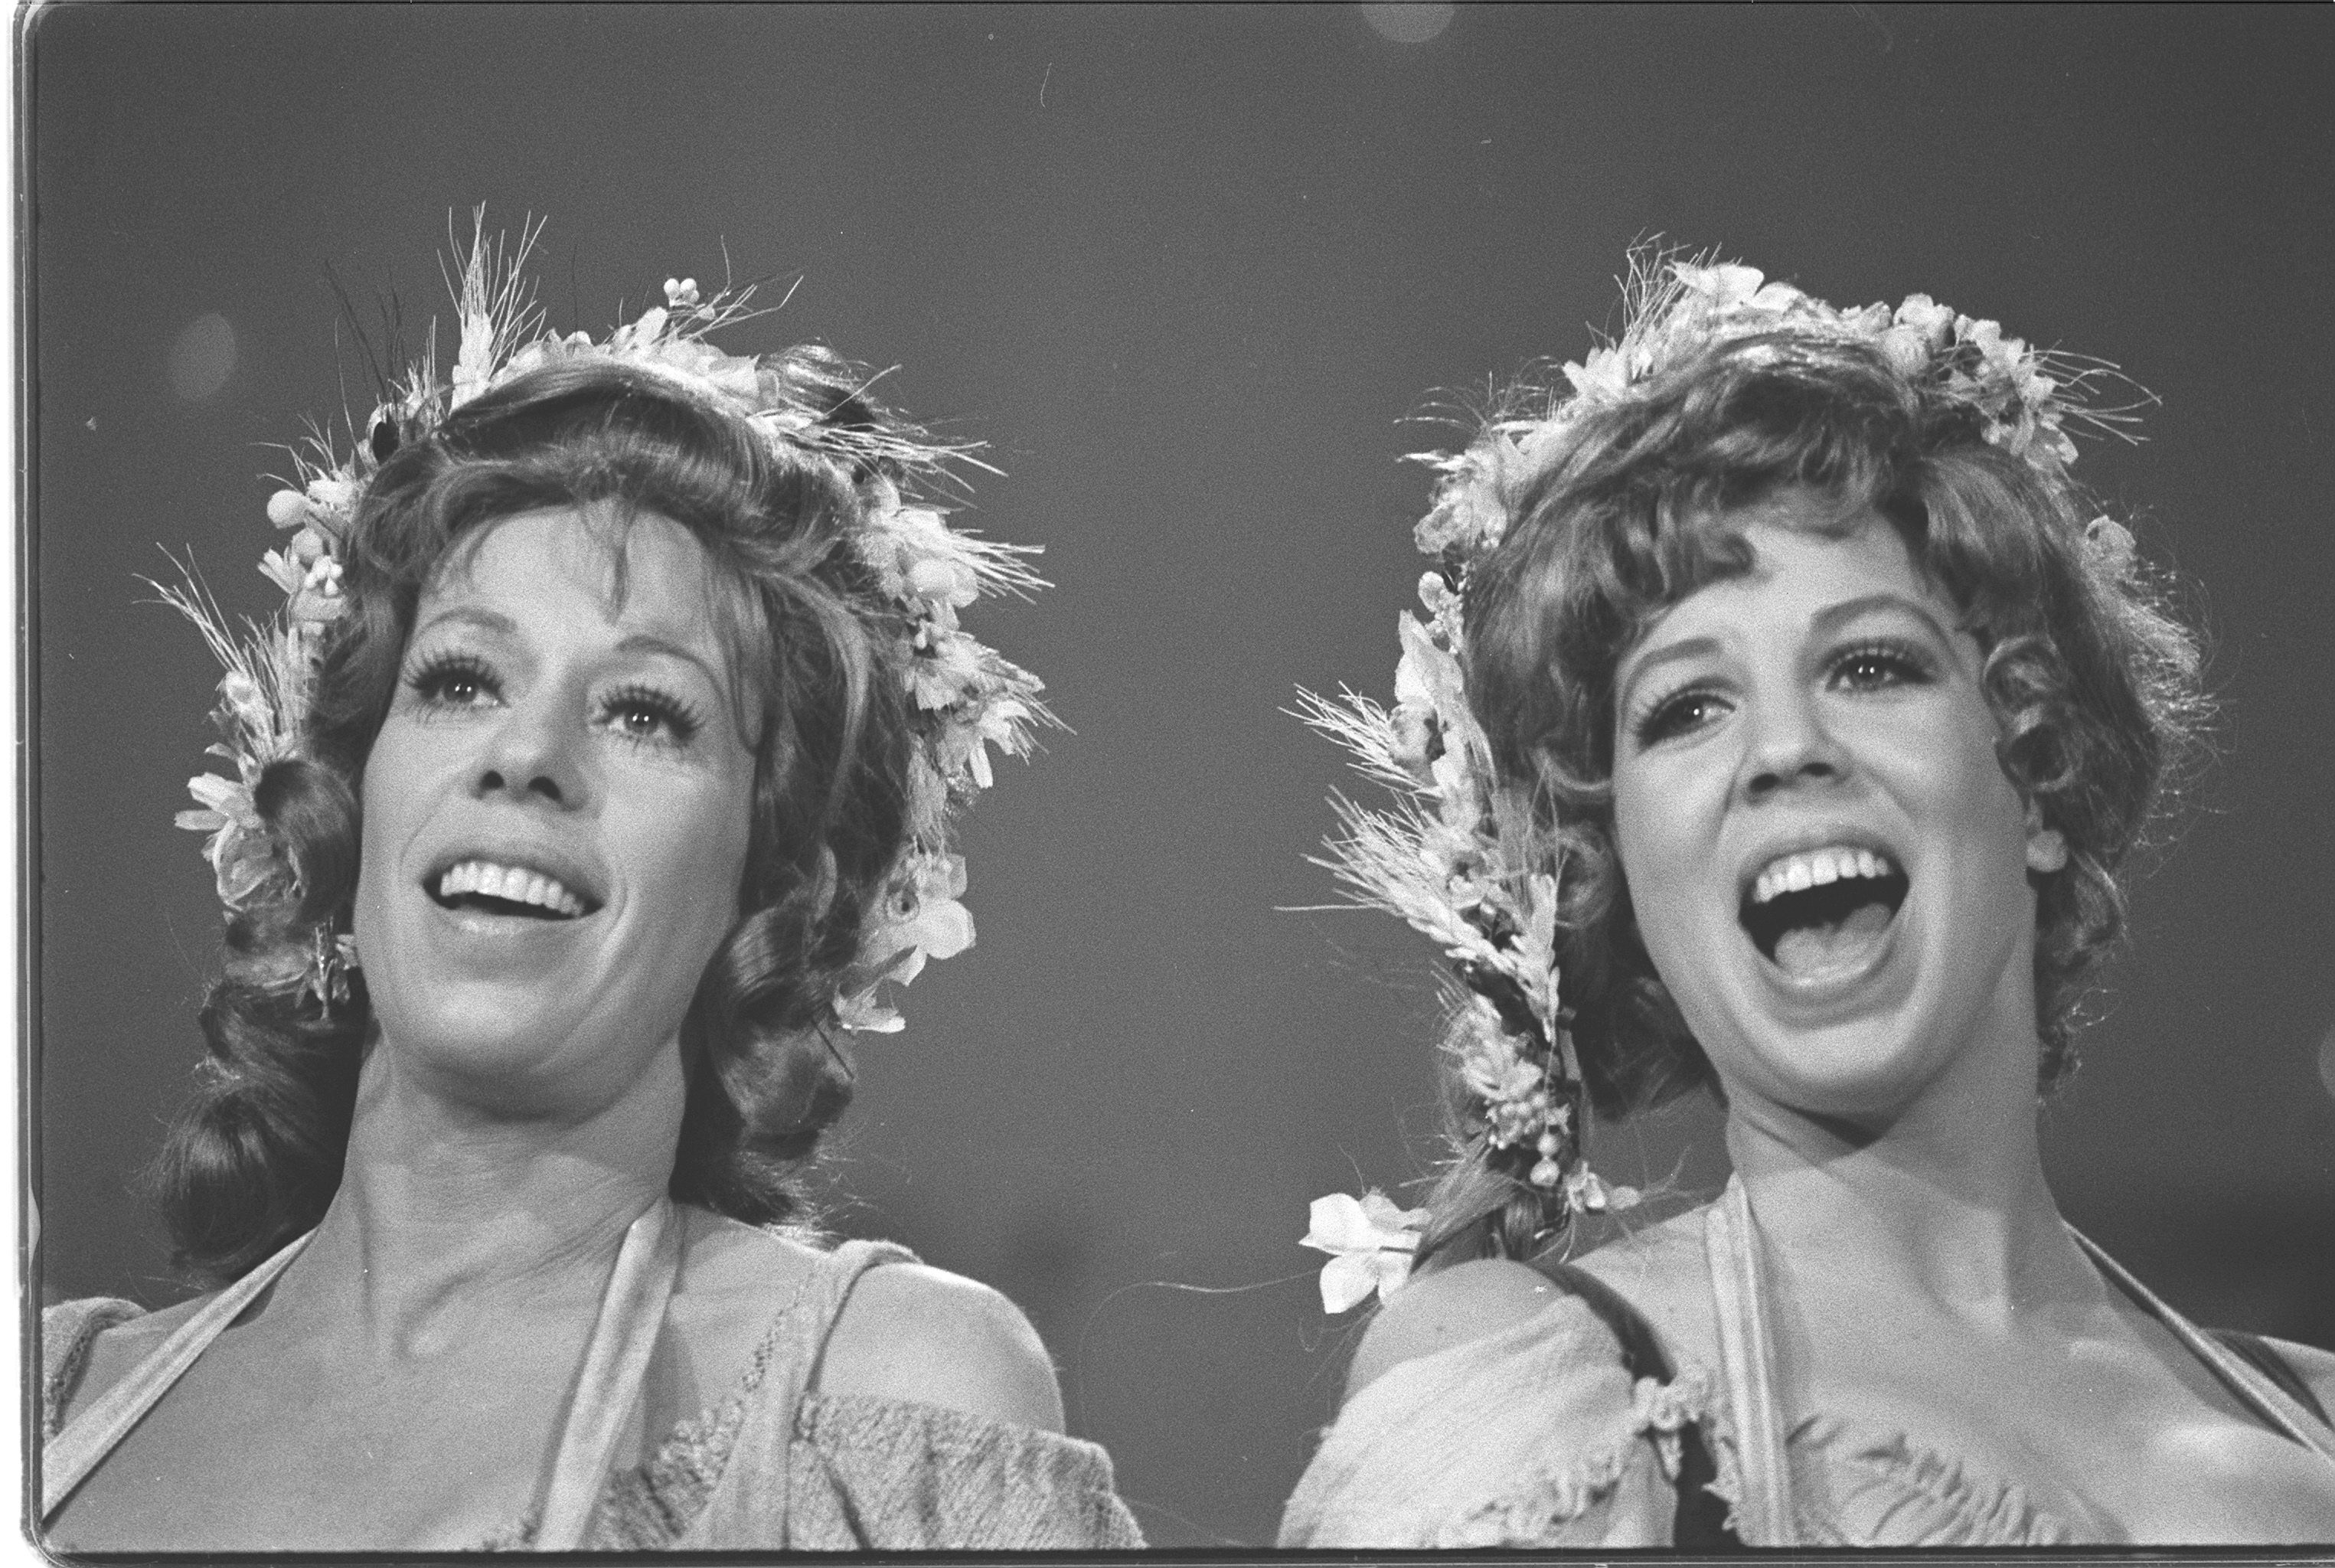 Carol Burnett and Vicki Lawrence singing, wearing flowers in their hair, in a musical skit from 'The Carol Burnett Show' in September 1973.  | Source: Getty Images